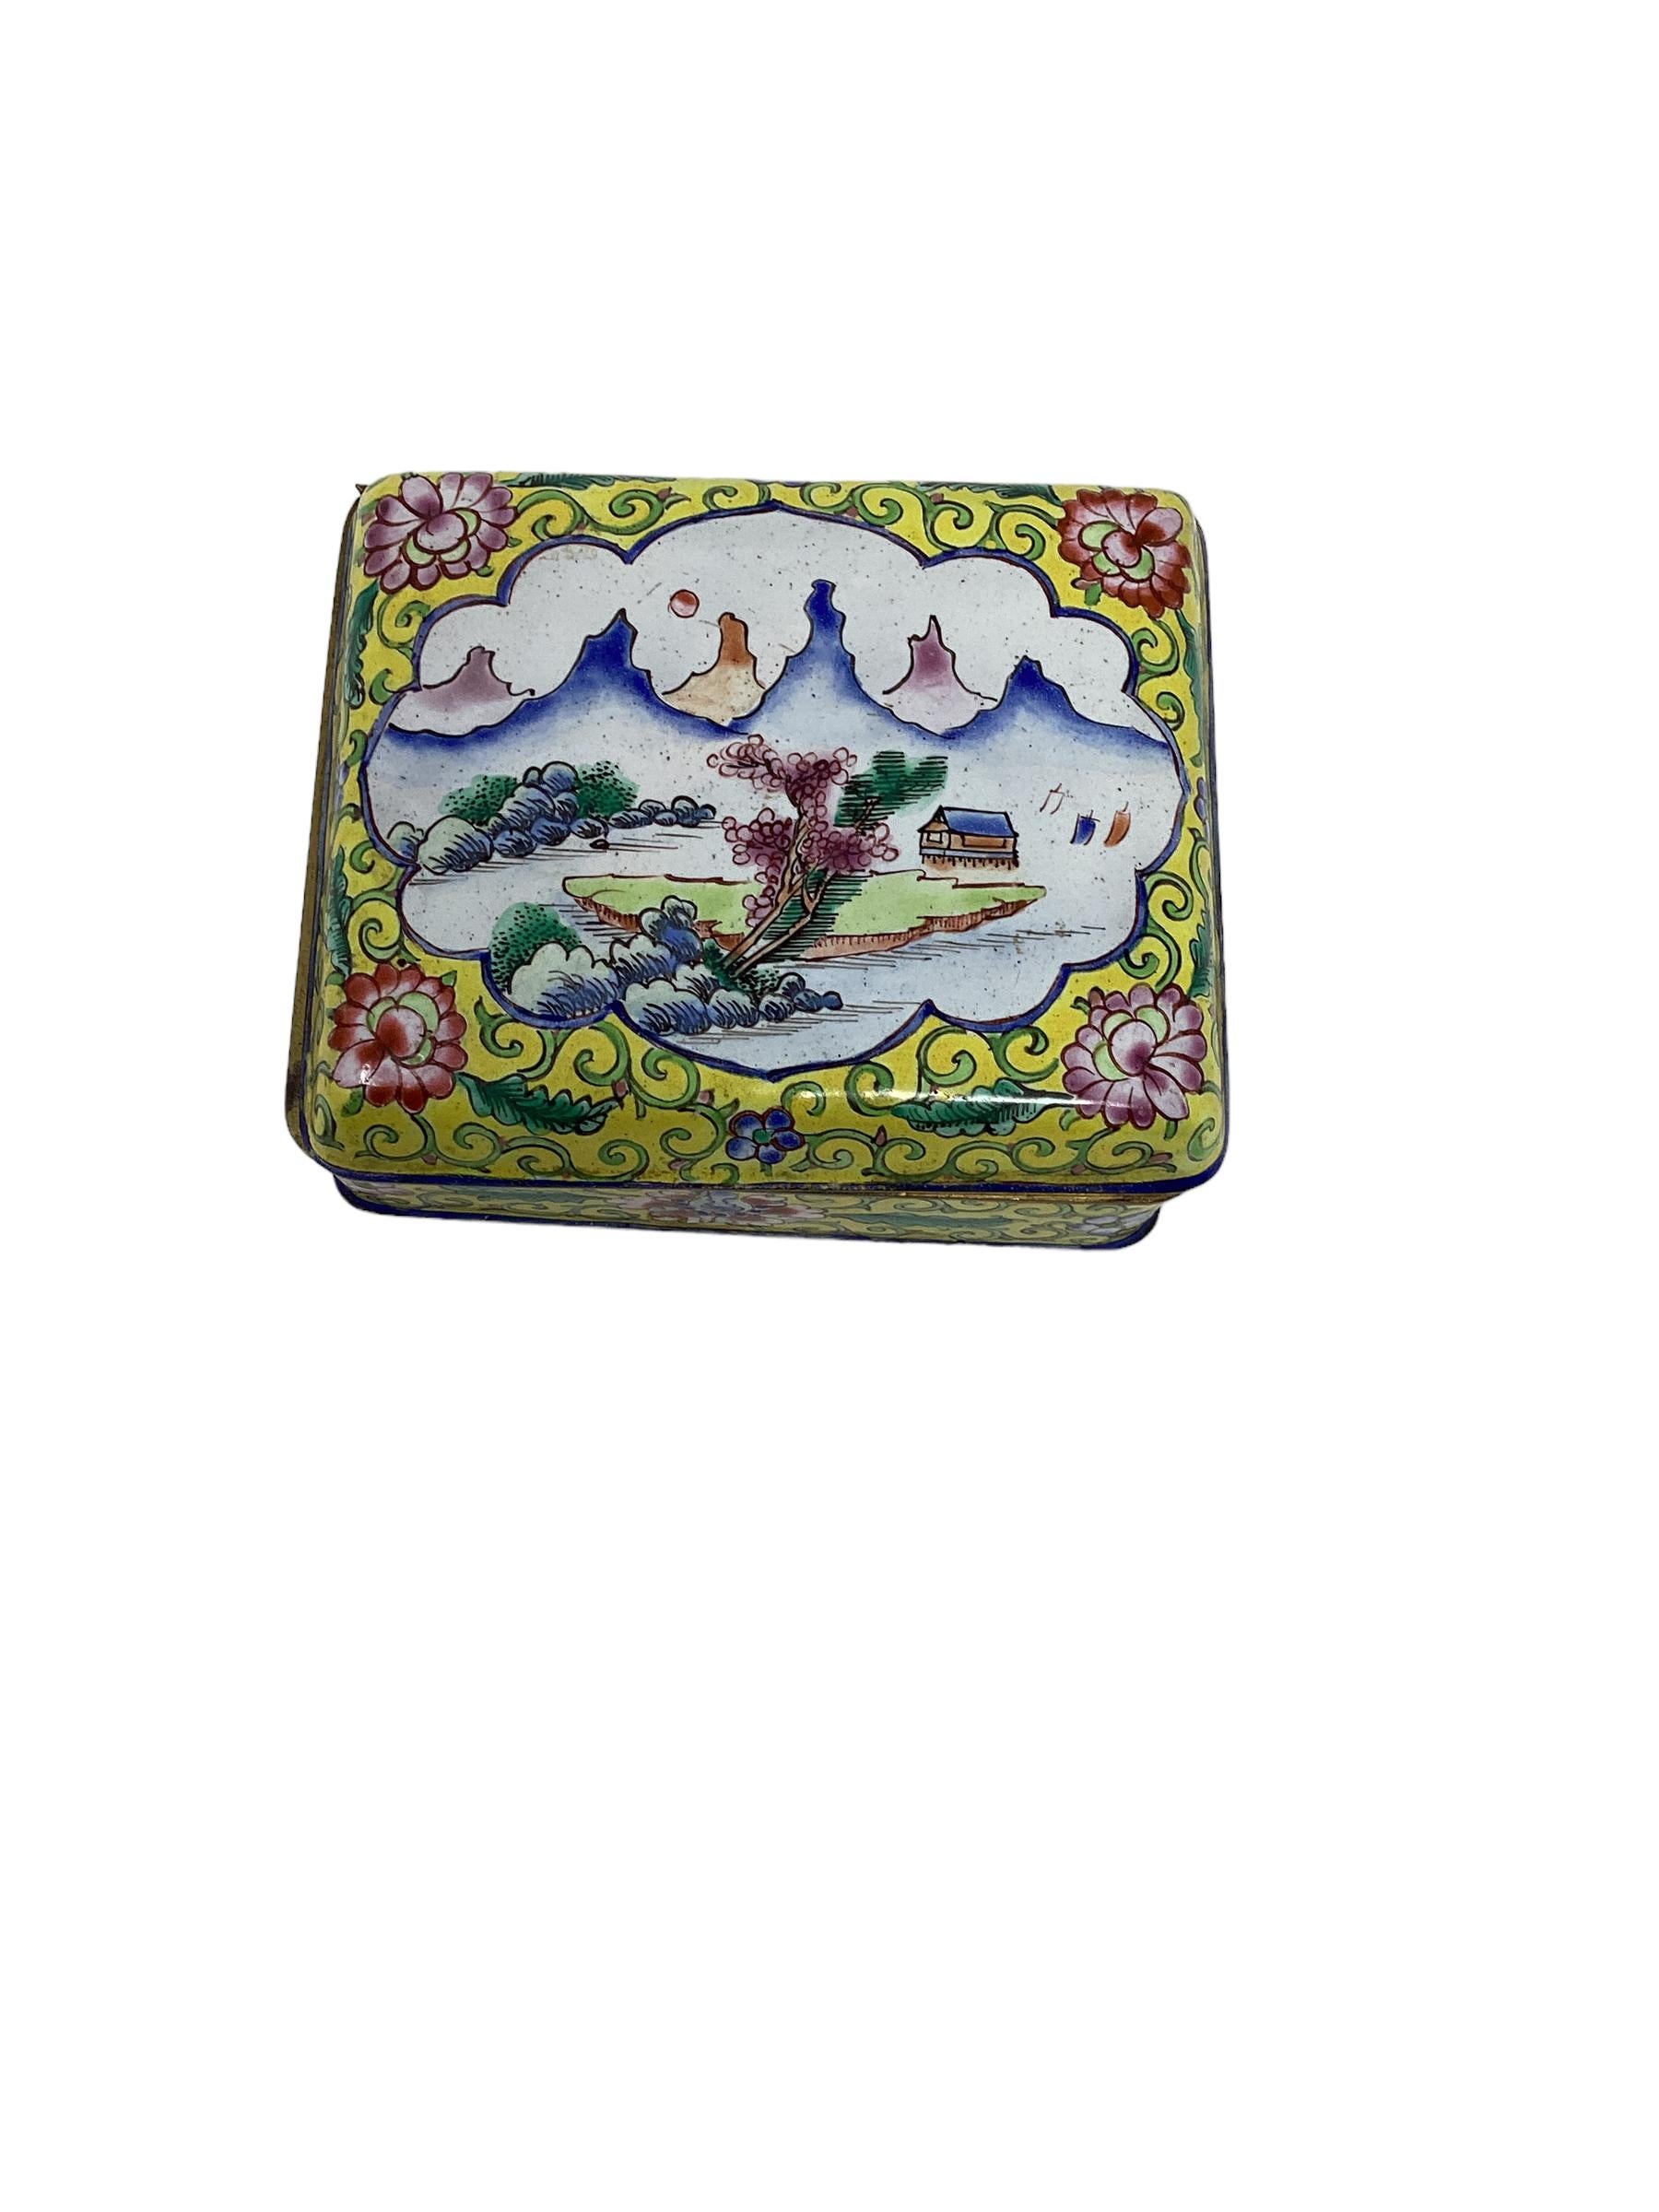 Lovely Chinese export cloisonné box made of brass and enameled with a beautiful mountain scene decoration in vibrant yellow color resting on ball feet. This chinoiserie box is marked china and dates from 1900-1920. This decorative box was most